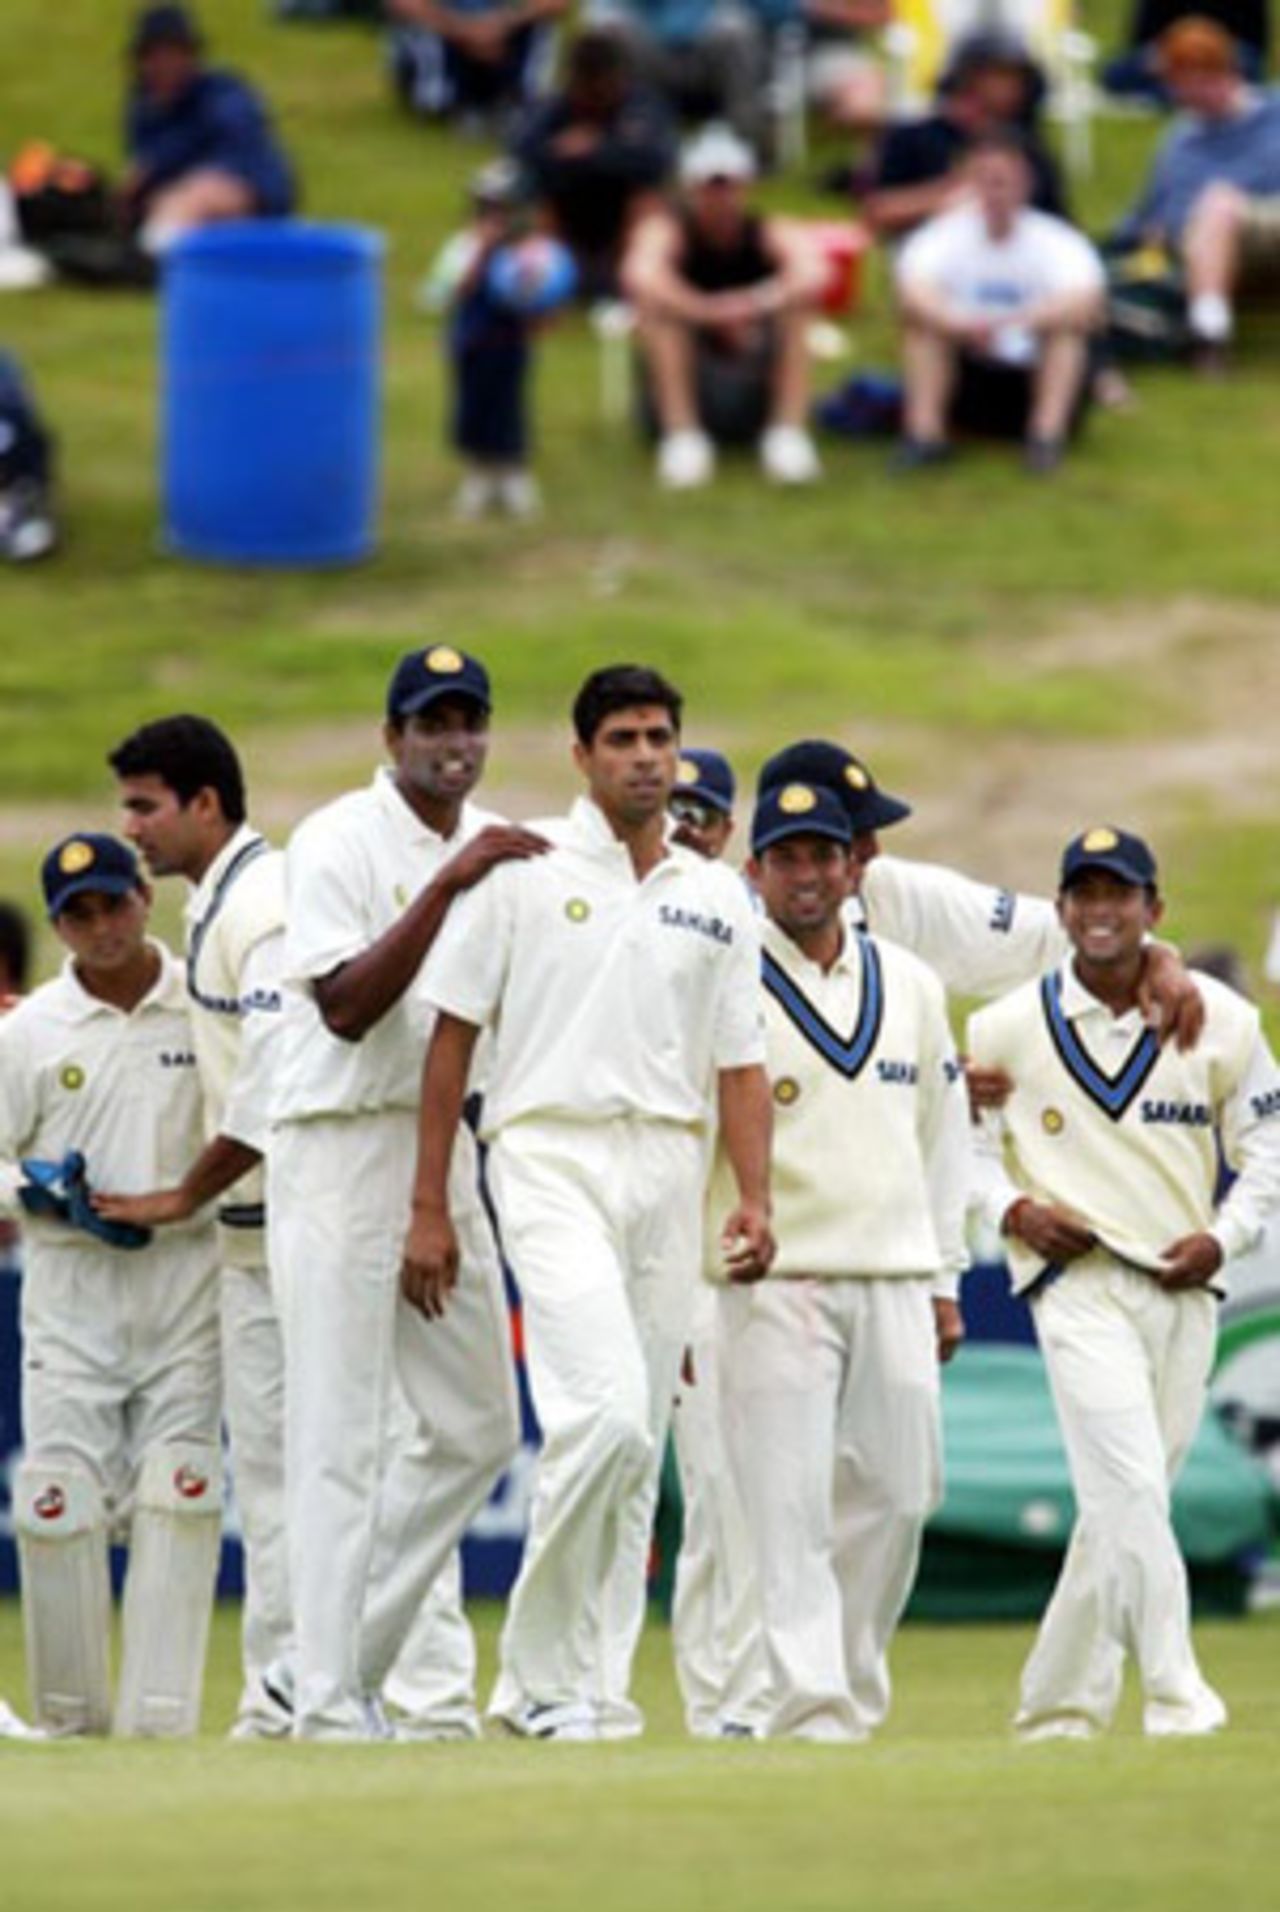 Members of the Indian team celebrate the dismissal of New Zealand batsman Mark Richardson, caught by wicket-keeper Parthiv Patel off the bowling of Ashish Nehra for 28. From left: Patel, Zaheer Khan, Tinu Yohannan, Nehra, Sachin Tendulkar and substitute fielder Shiv Sunder Das. 2nd Test: New Zealand v India at Westpac Park, Hamilton, 19-23 December 2002 (22 December 2002).